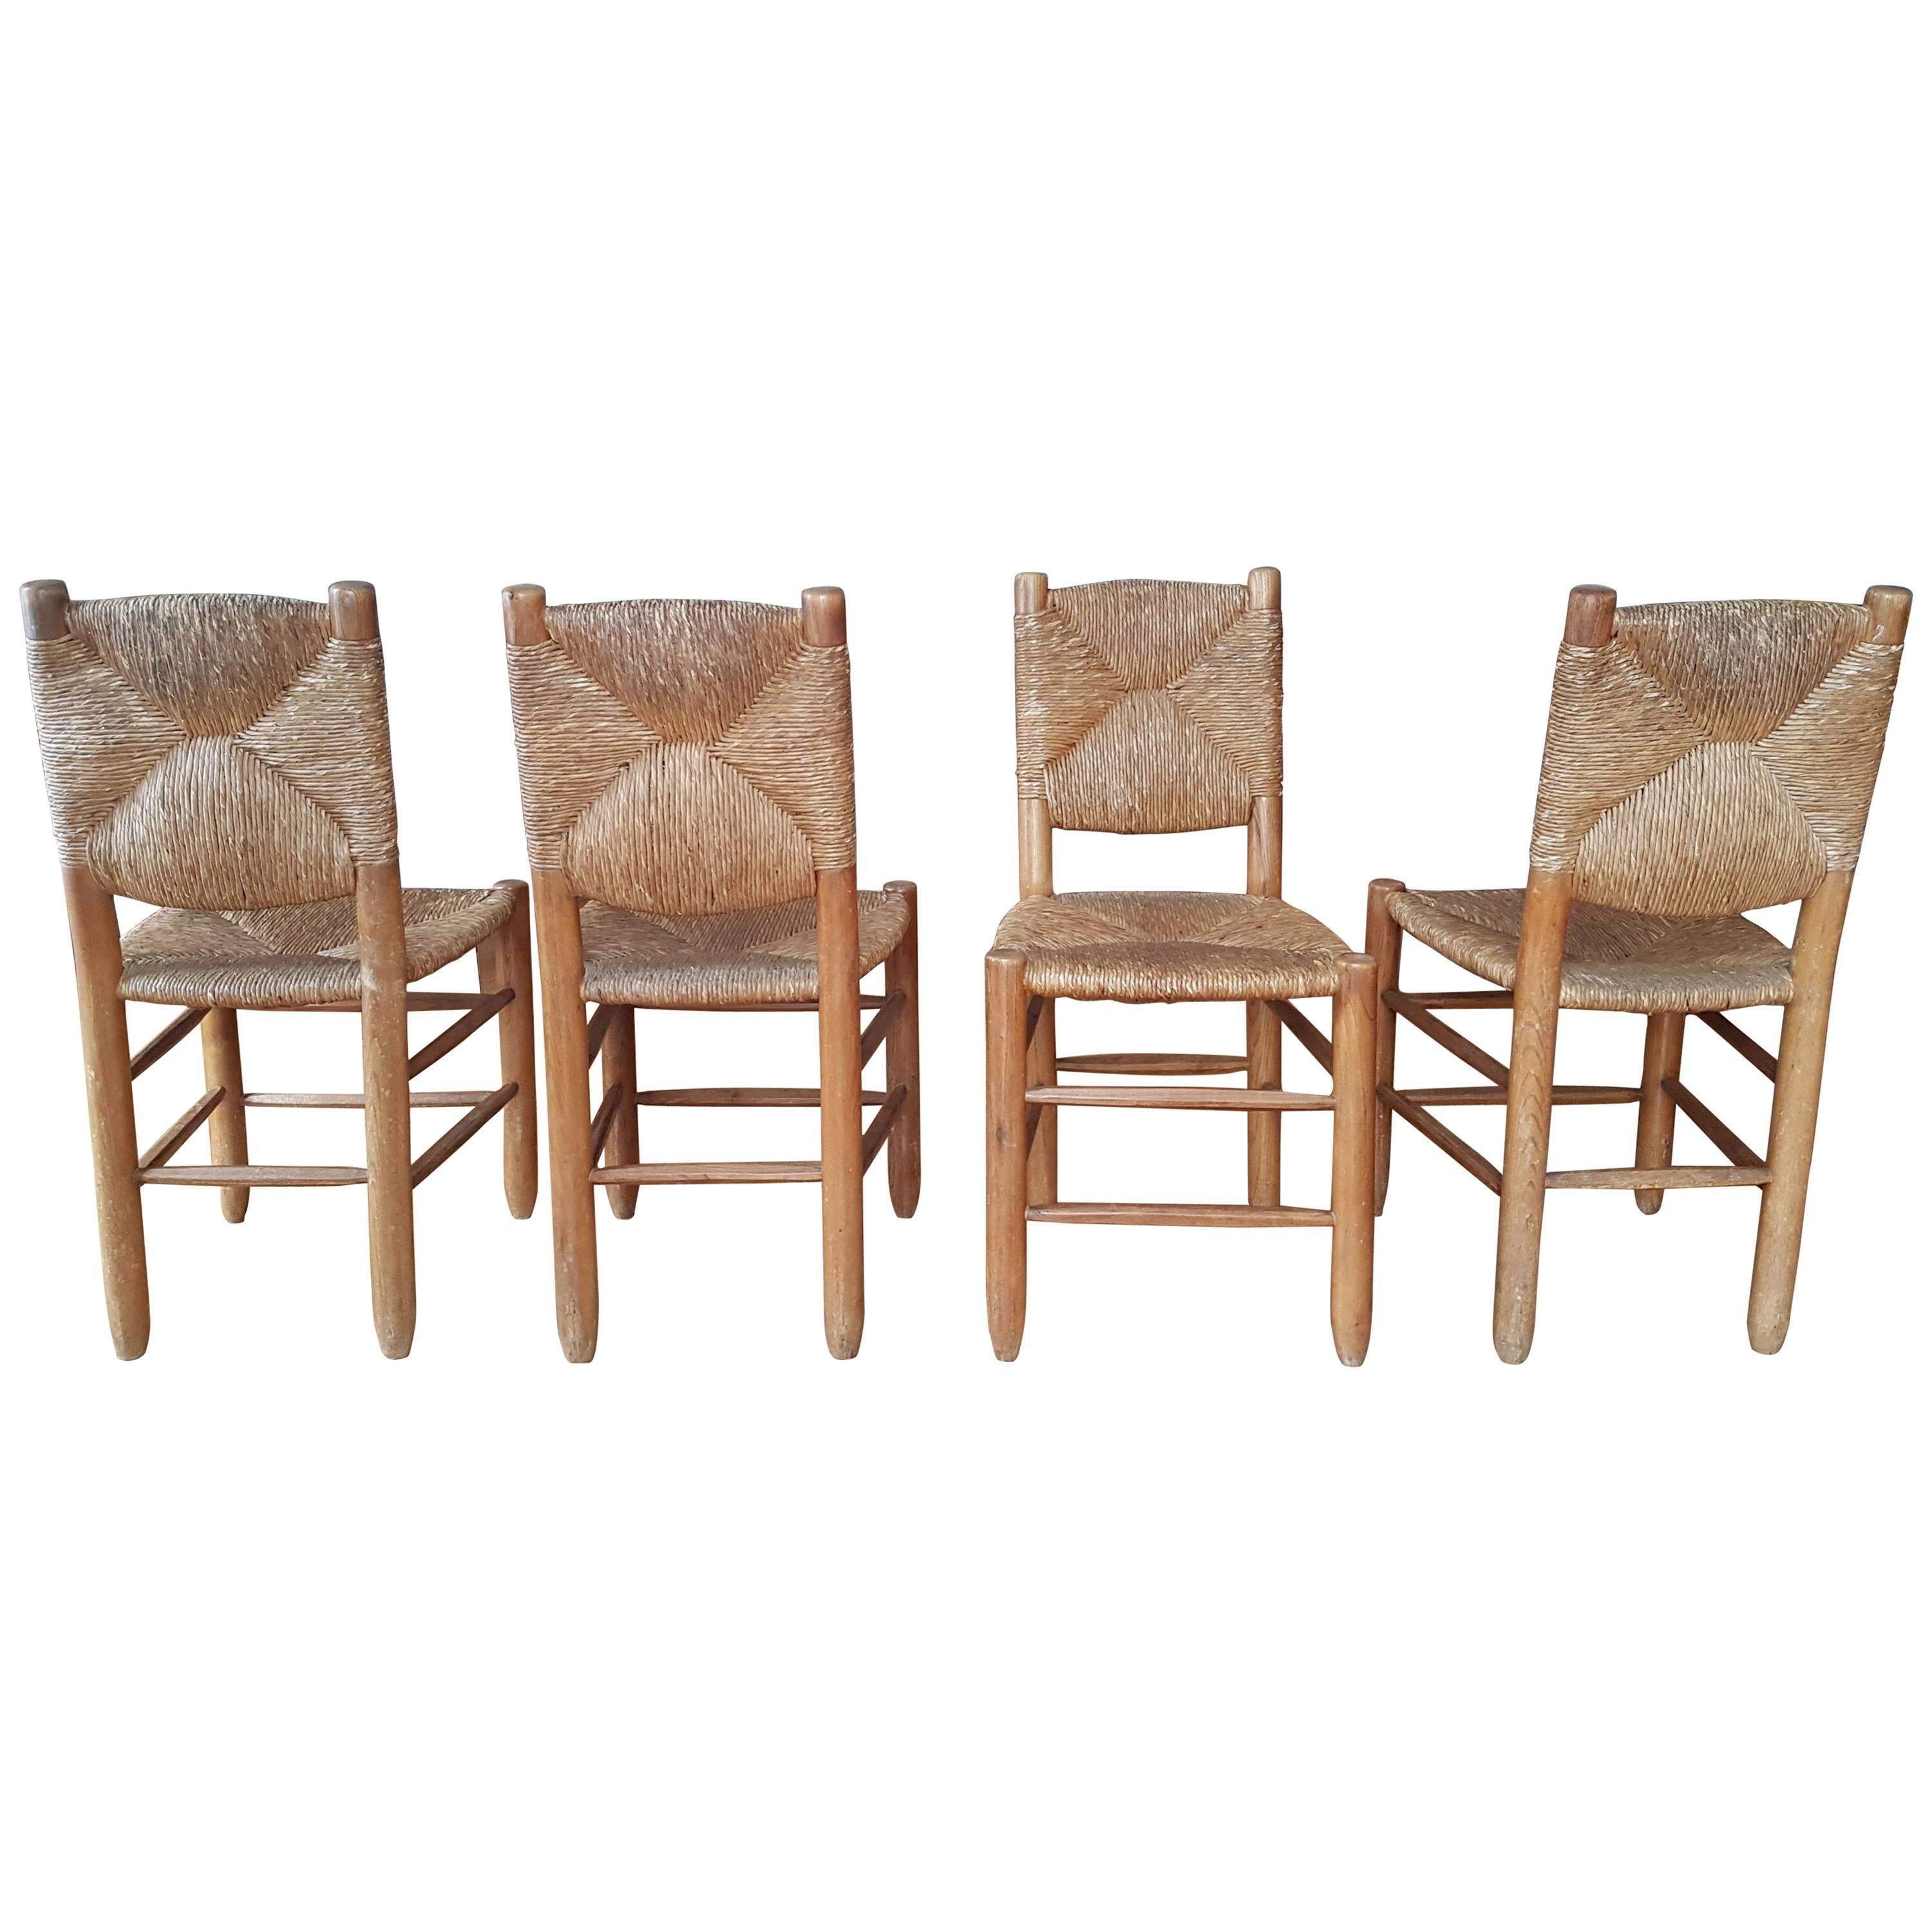 Four "Bauche" Chairs from Charlotte Perriand from 1939 in Straw